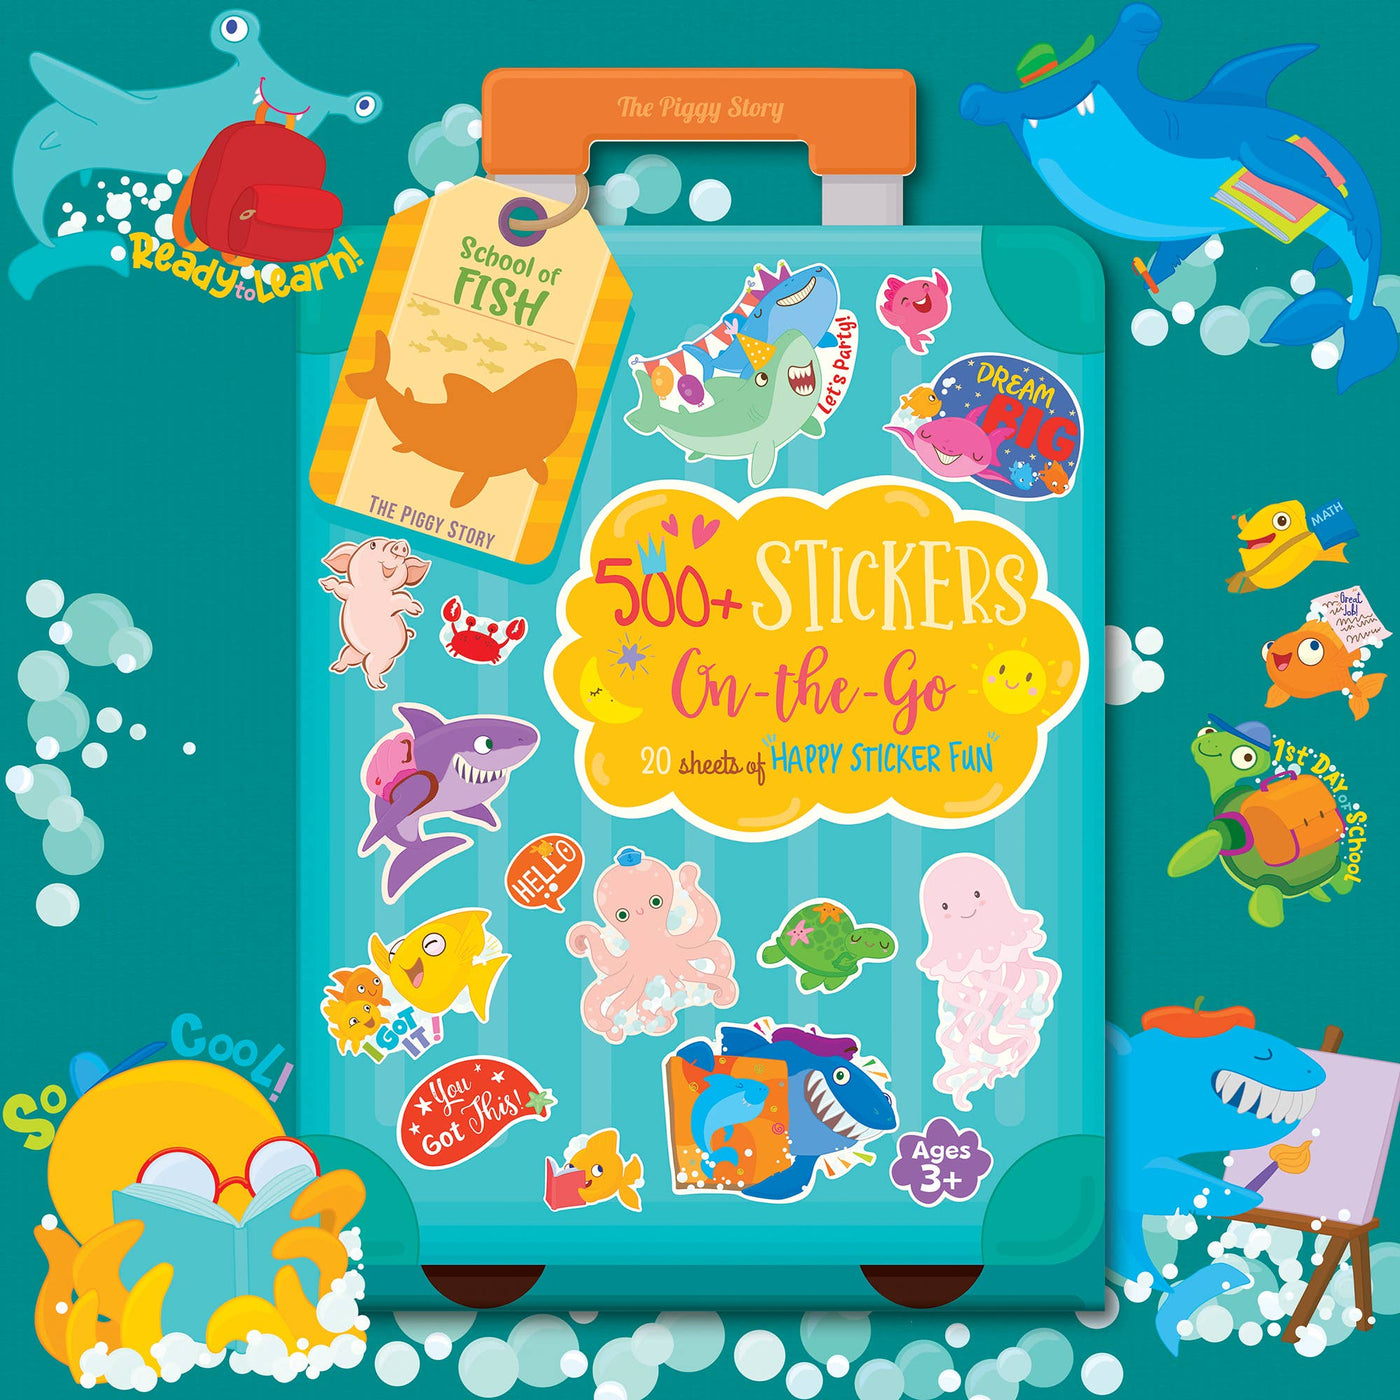 The Piggy Story - 500+ Stickers On-the-Go School of Fish